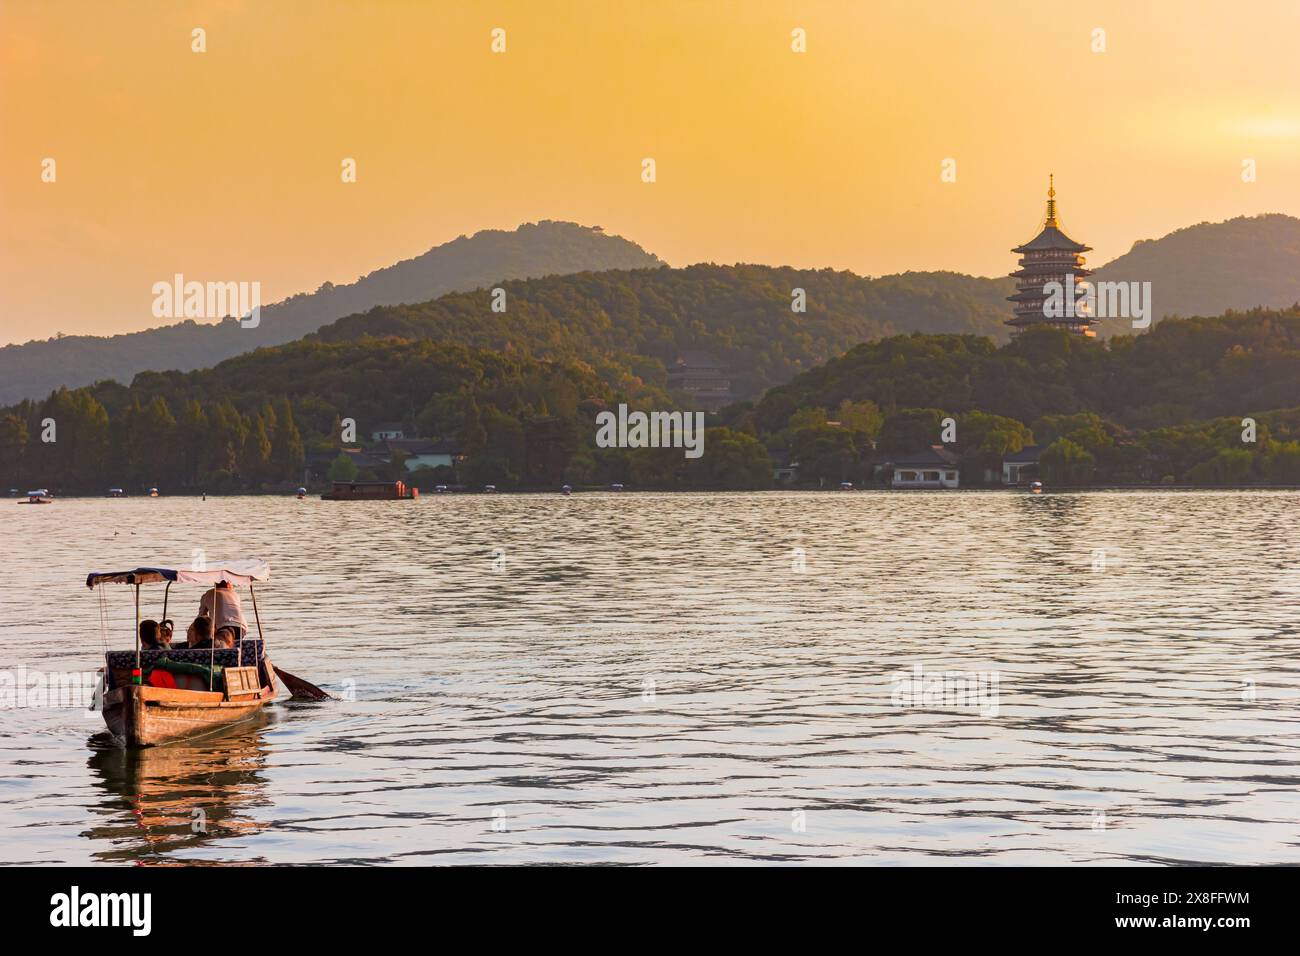 Wooden boat in sunset on the West Lake in Hangzhou, China Stock Photo